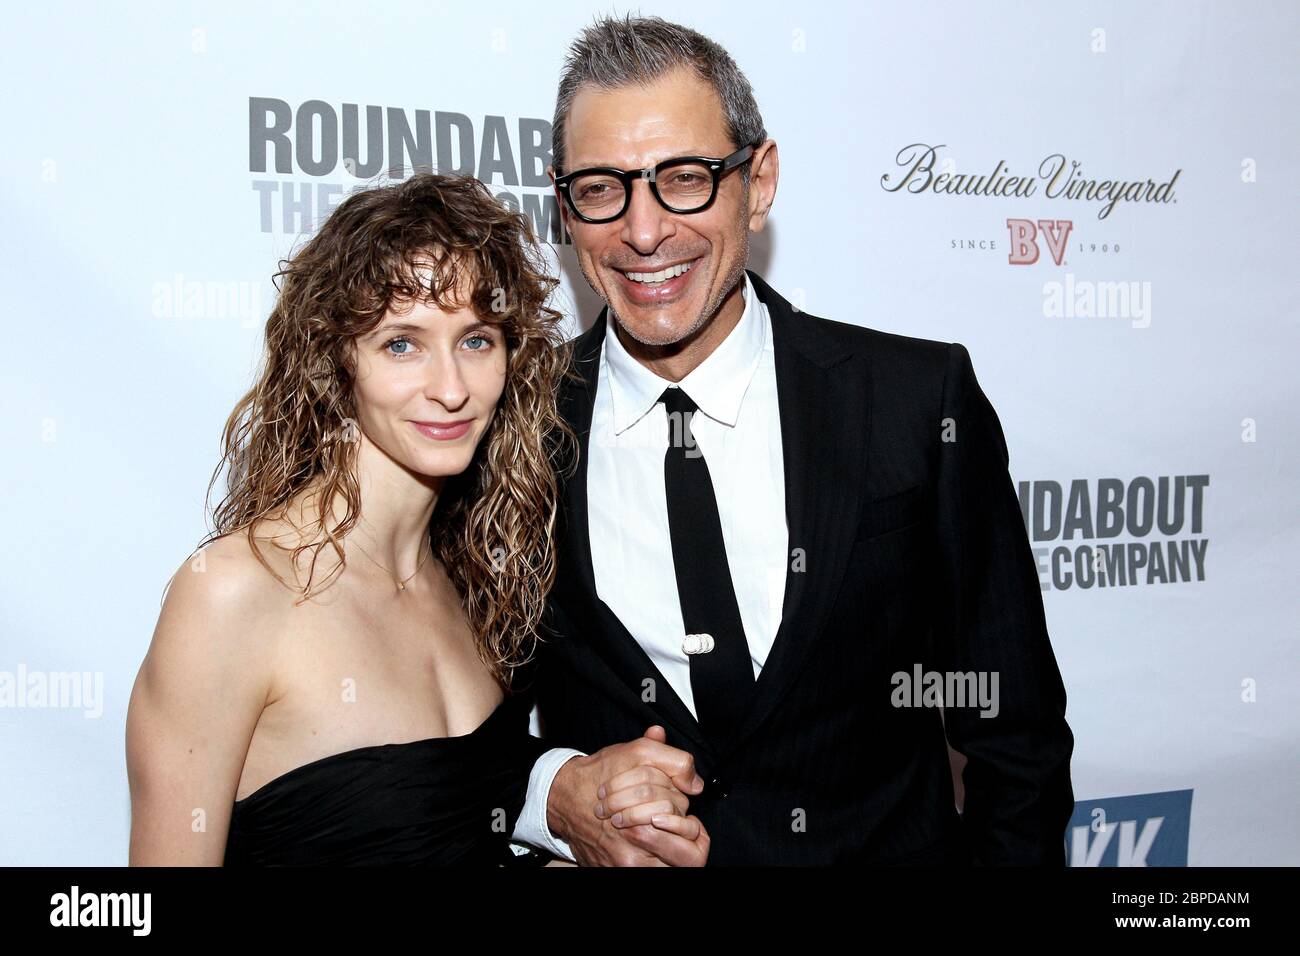 New York, NY, USA. 12 March, 2012. Emilie Livingston, Jeff Goldblum at the Roundabout Theatre Company's 2012 Spring Gala at The Hammerstein Ballroom. Credit: Steve Mack/Alamy Stock Photo